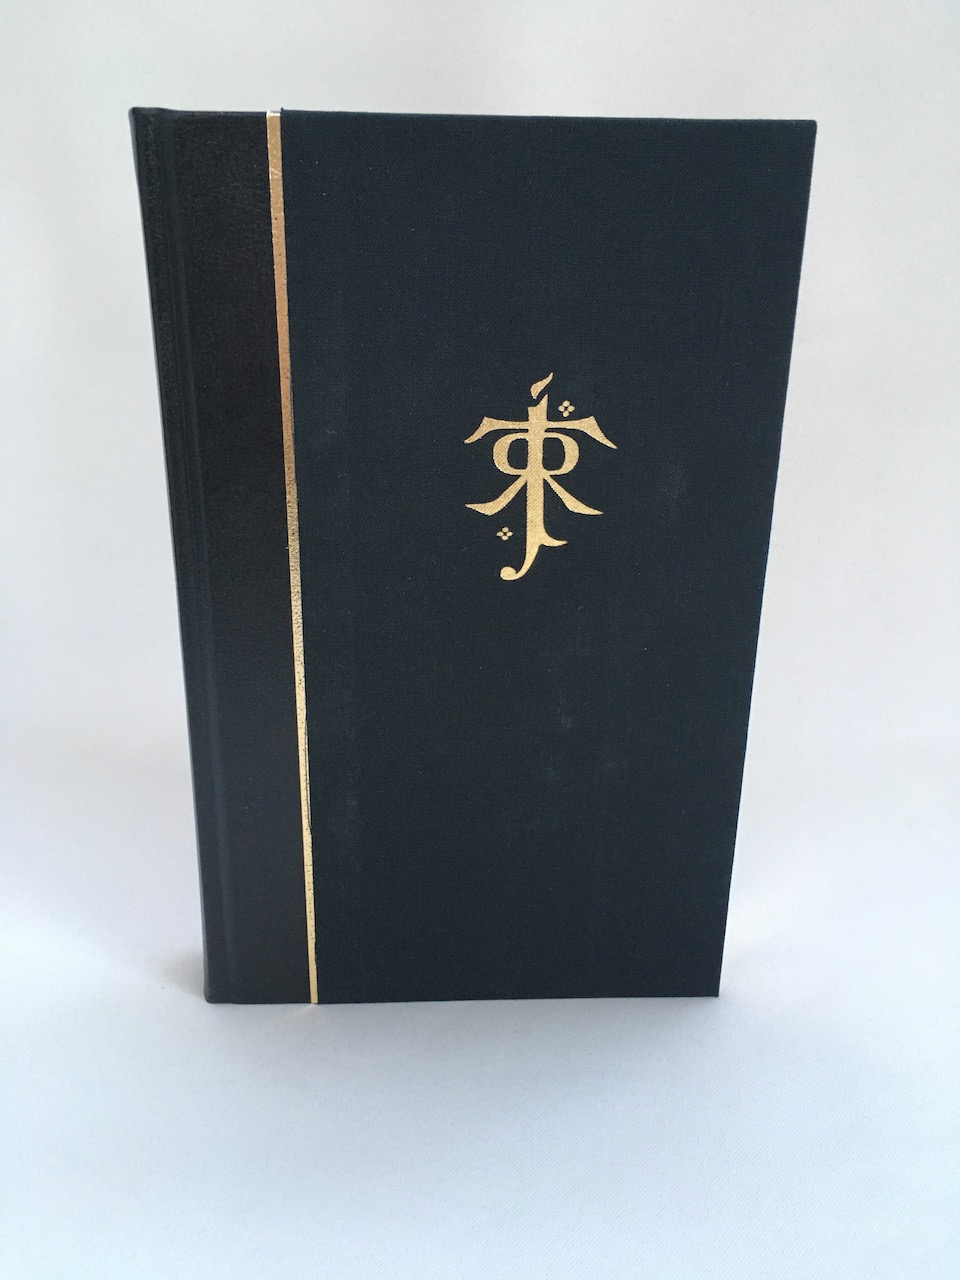 Lord of the Rings, Harper Collins Deluxe Limited Edition of 2001 - Black Leather 10